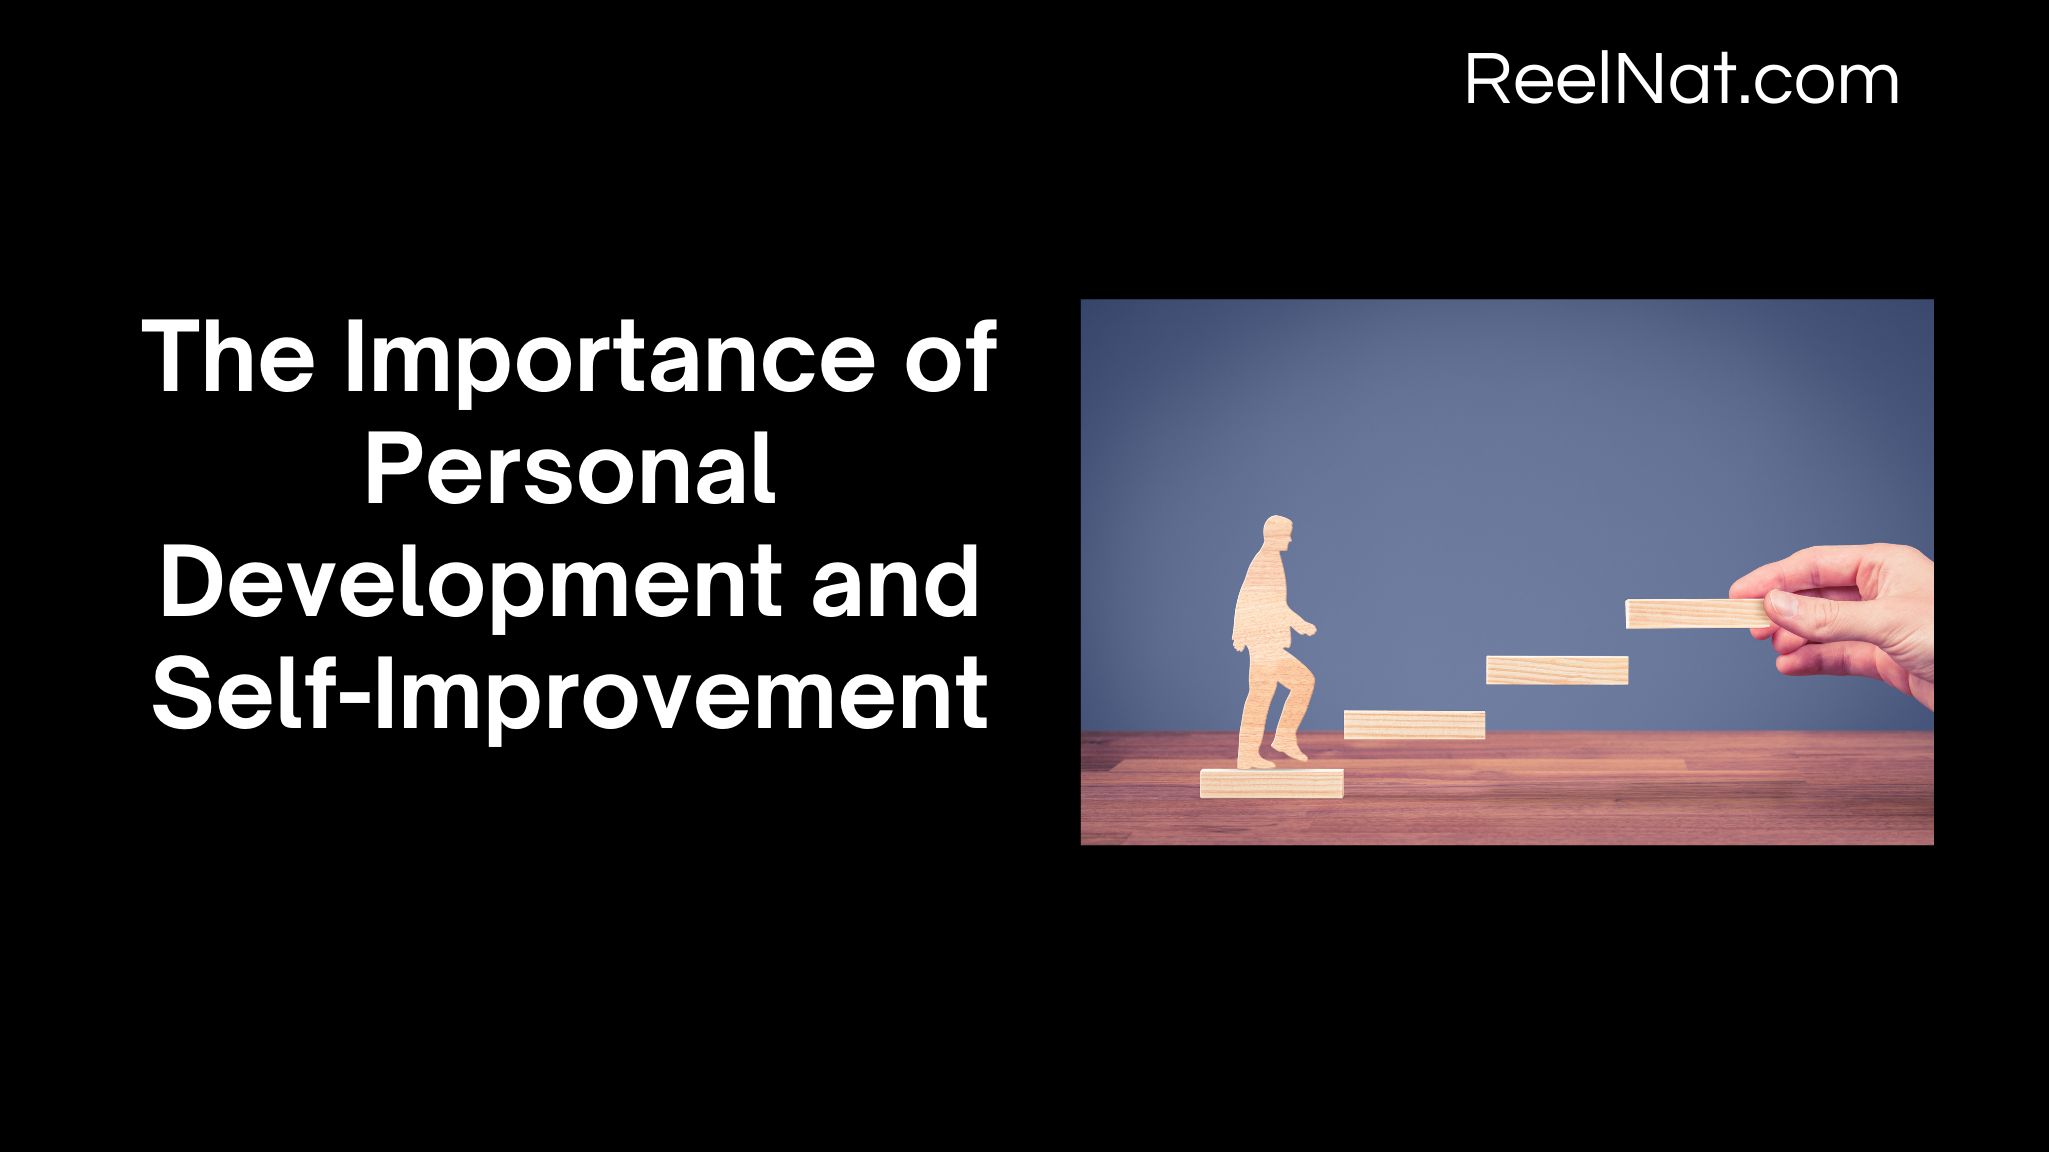 The Importance of Personal Development and Self-Improvement